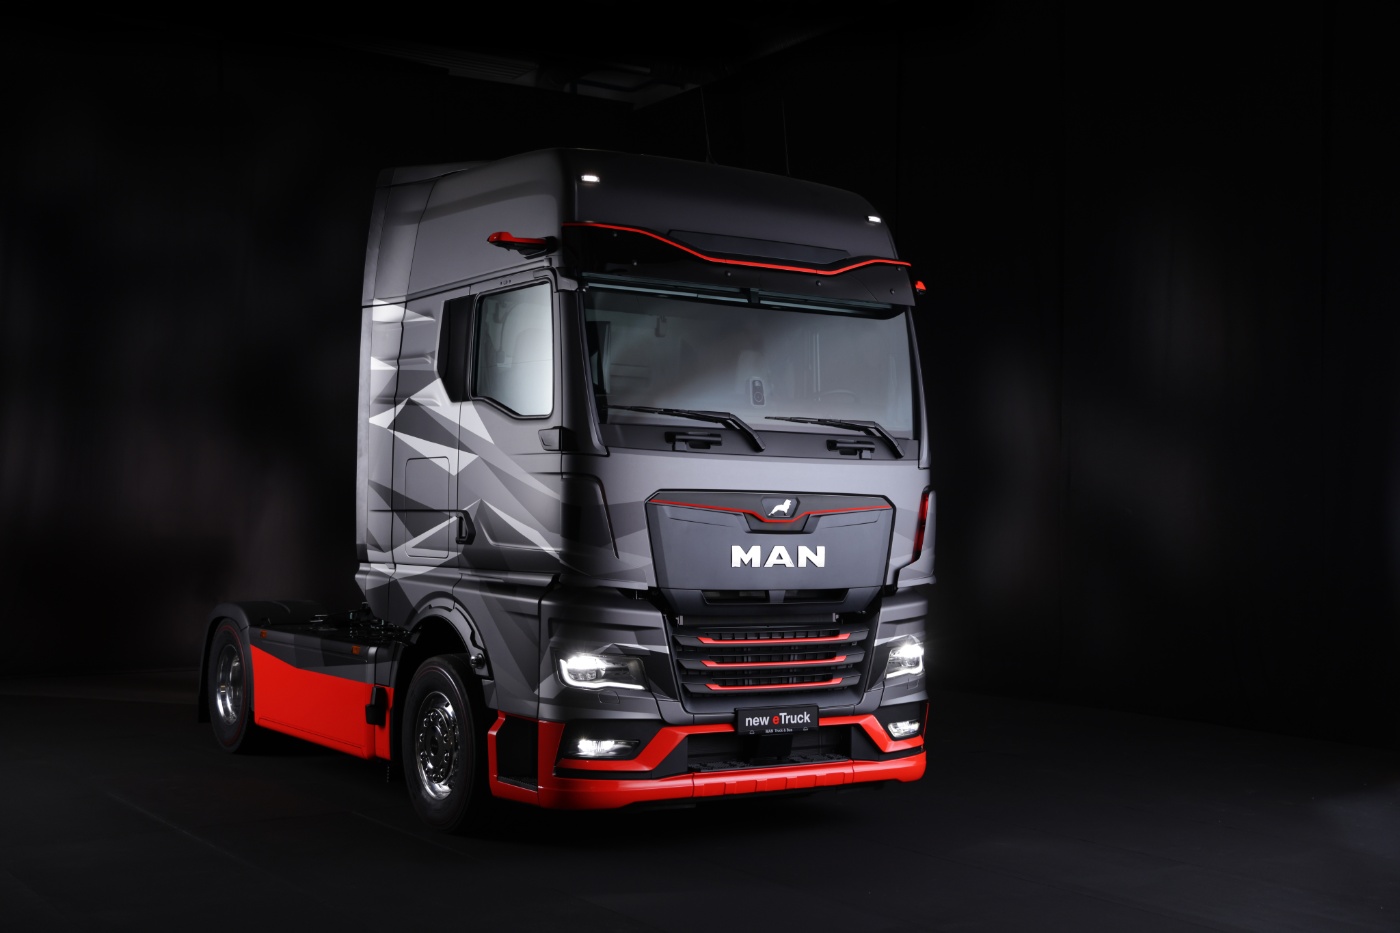 The new eTruck from MAN Truck & Bus as close-to-production prototype of new, high-volume truck. Photo: MAN Truck & Bus